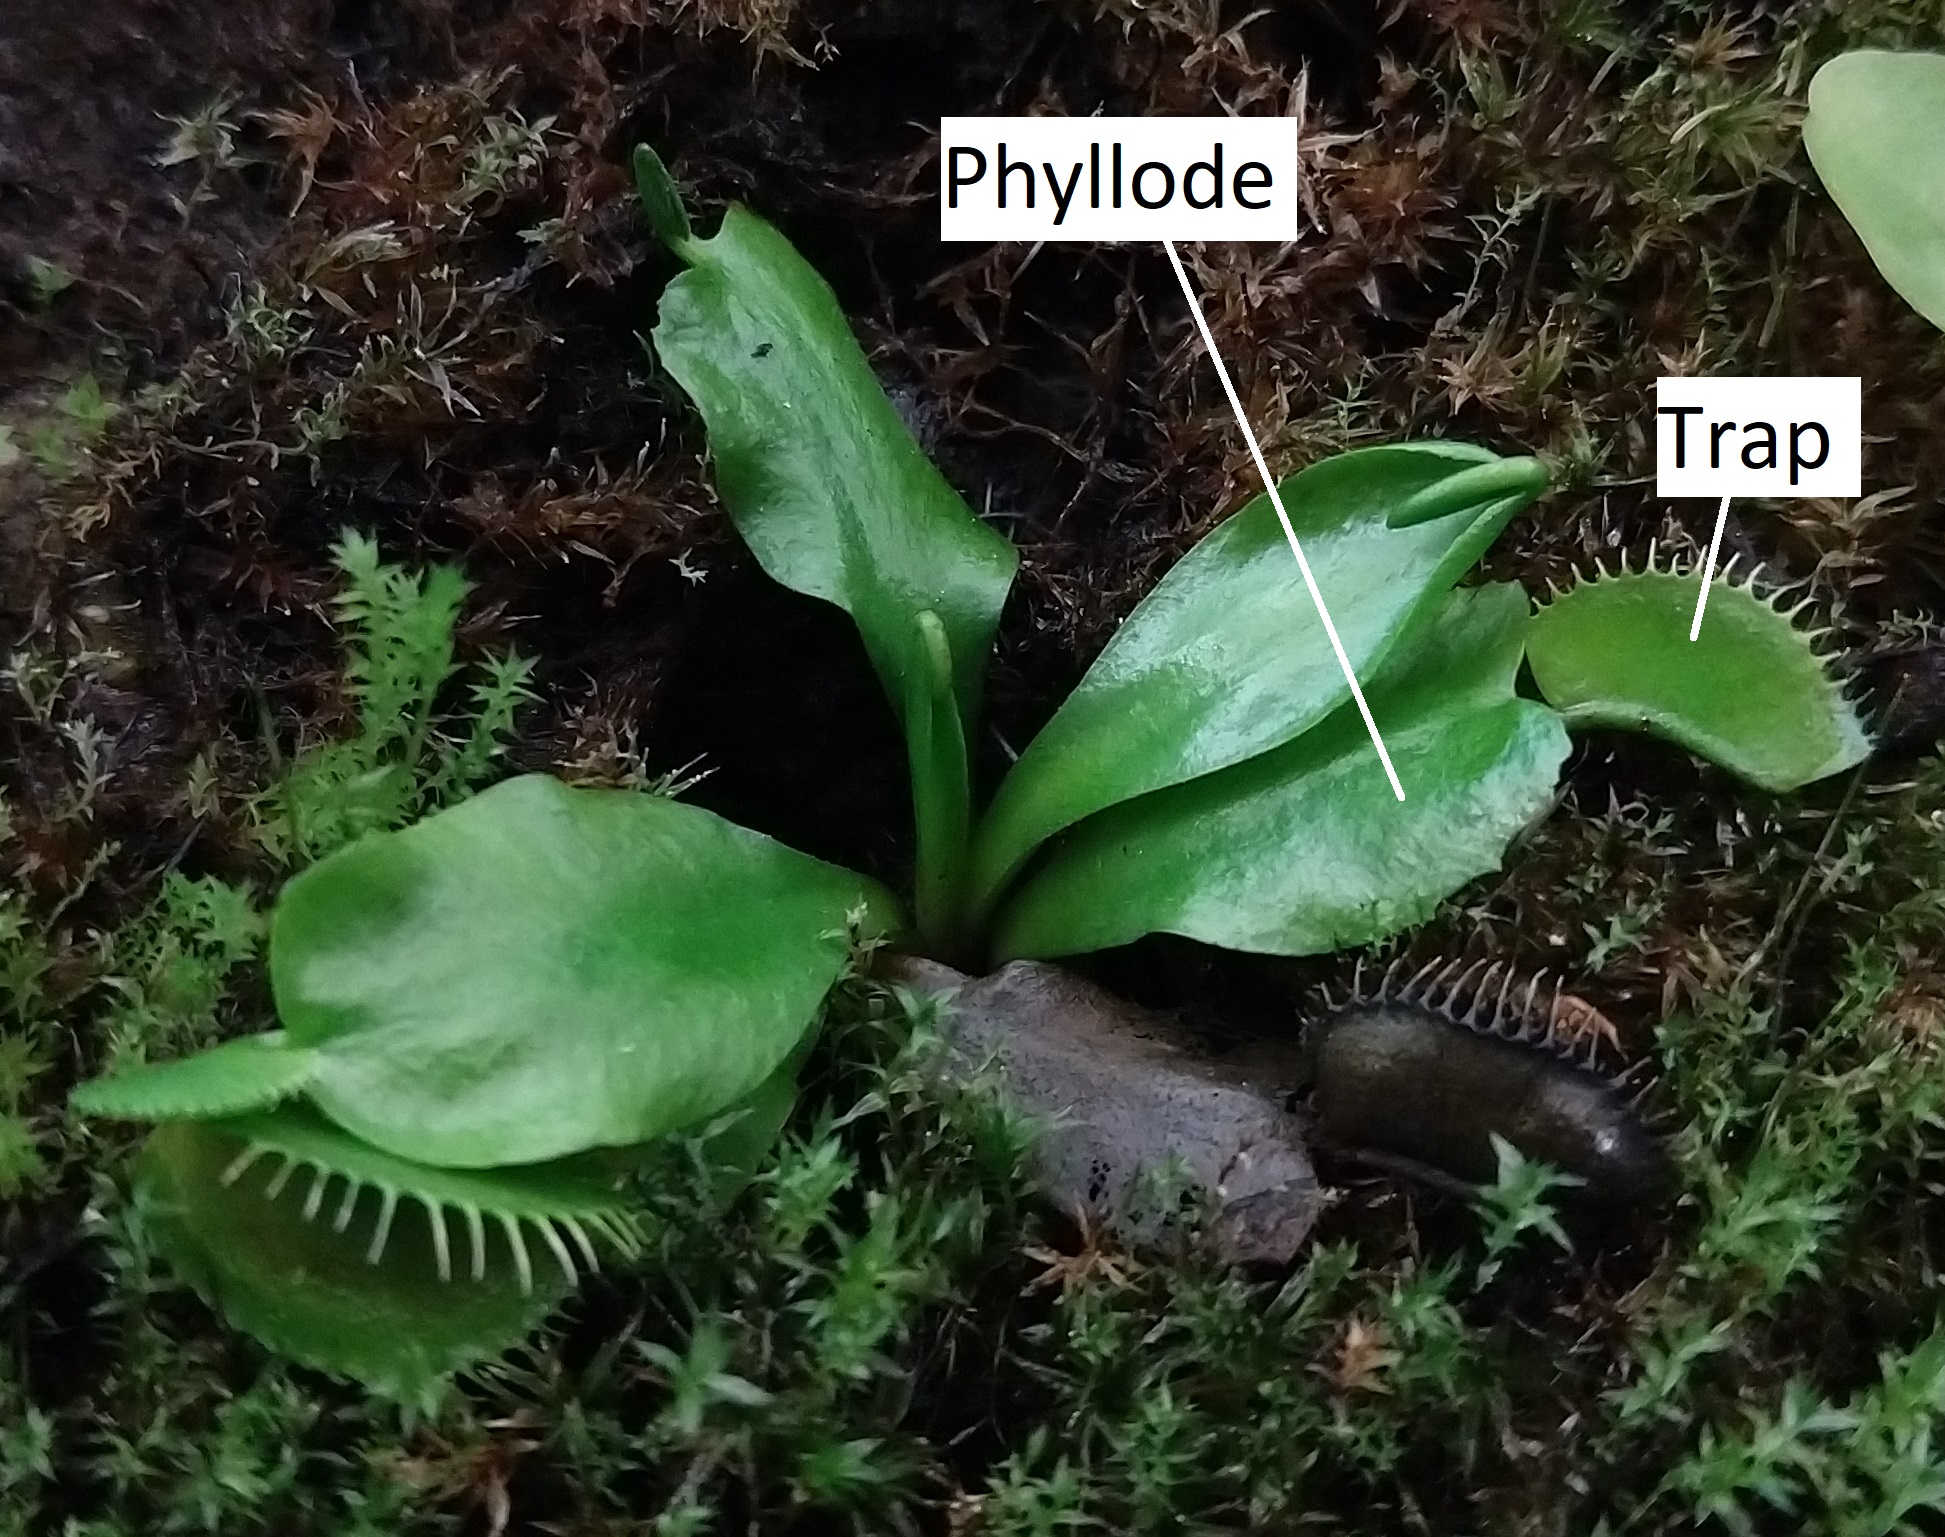 Dionaea (venus fly trap) leaf trap and phyllode, labeled